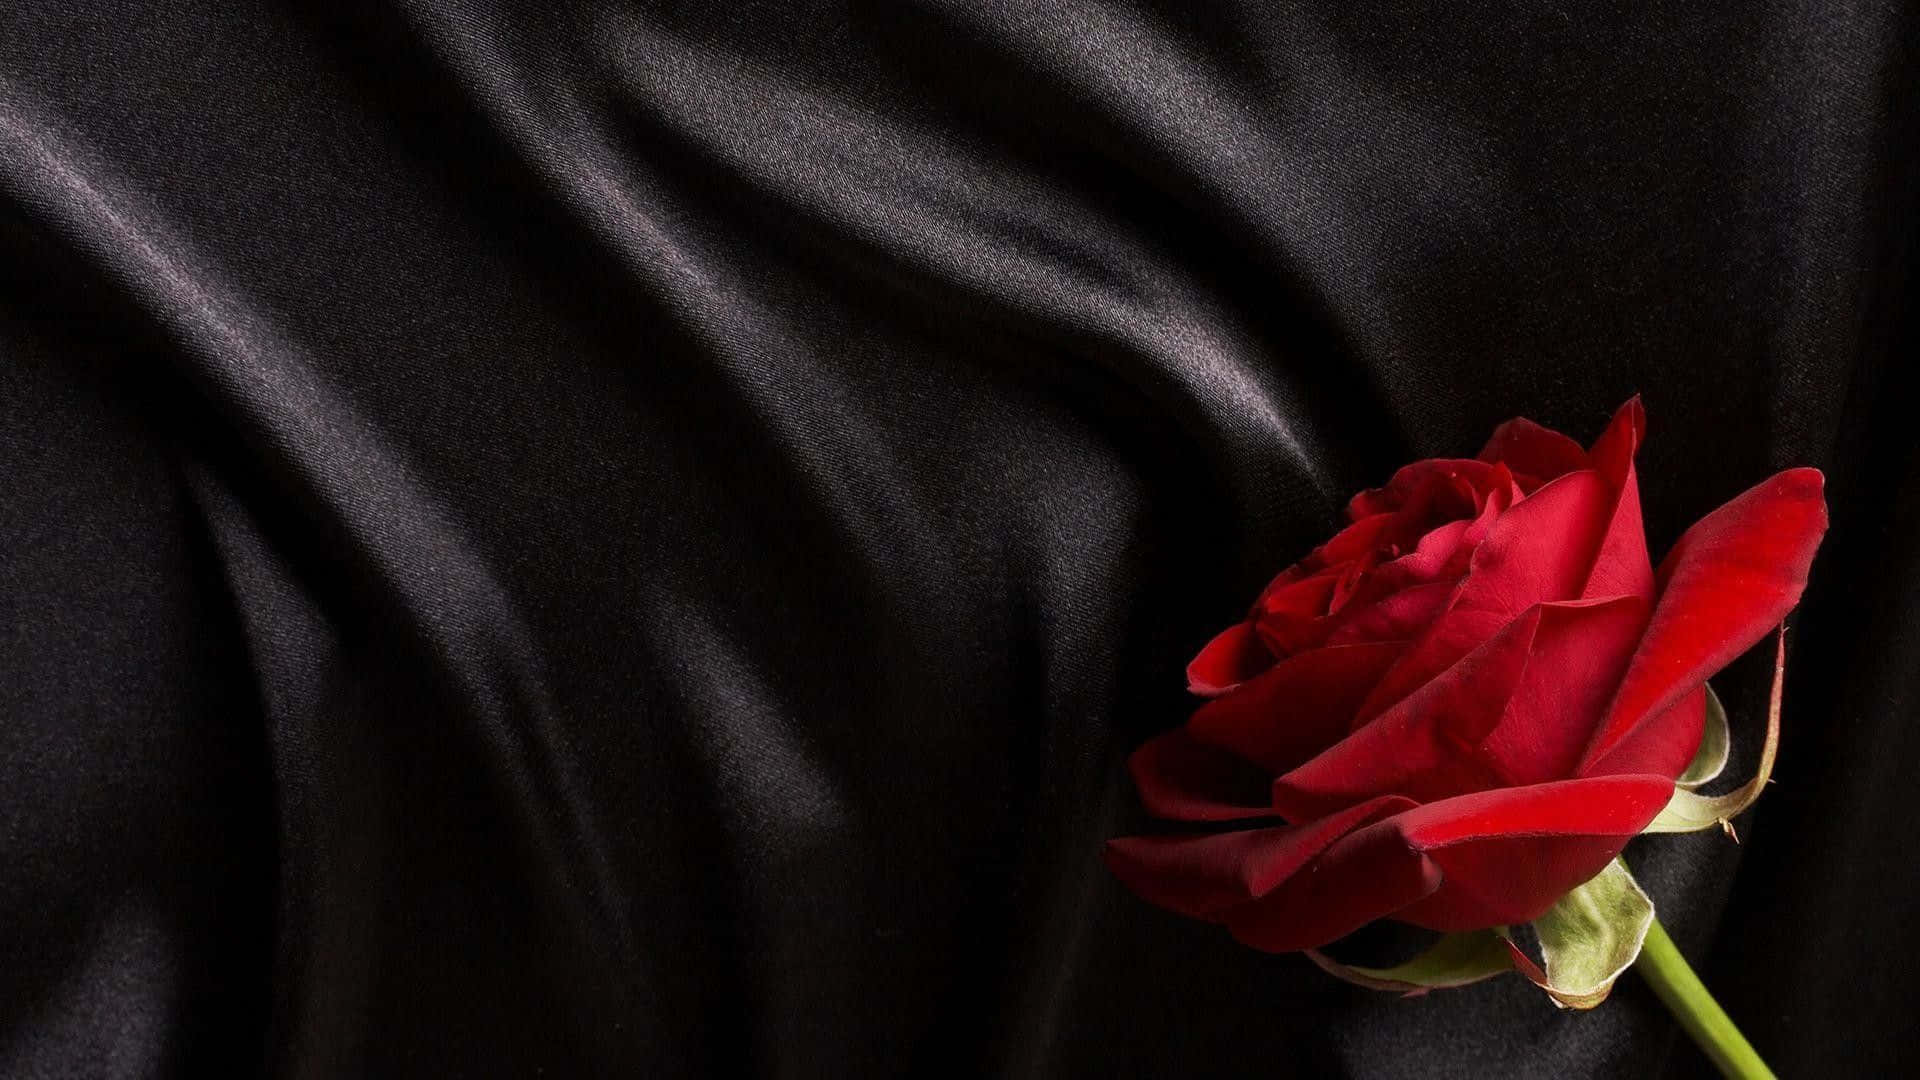 A Black Rose Representing Beauty And Elegance Background